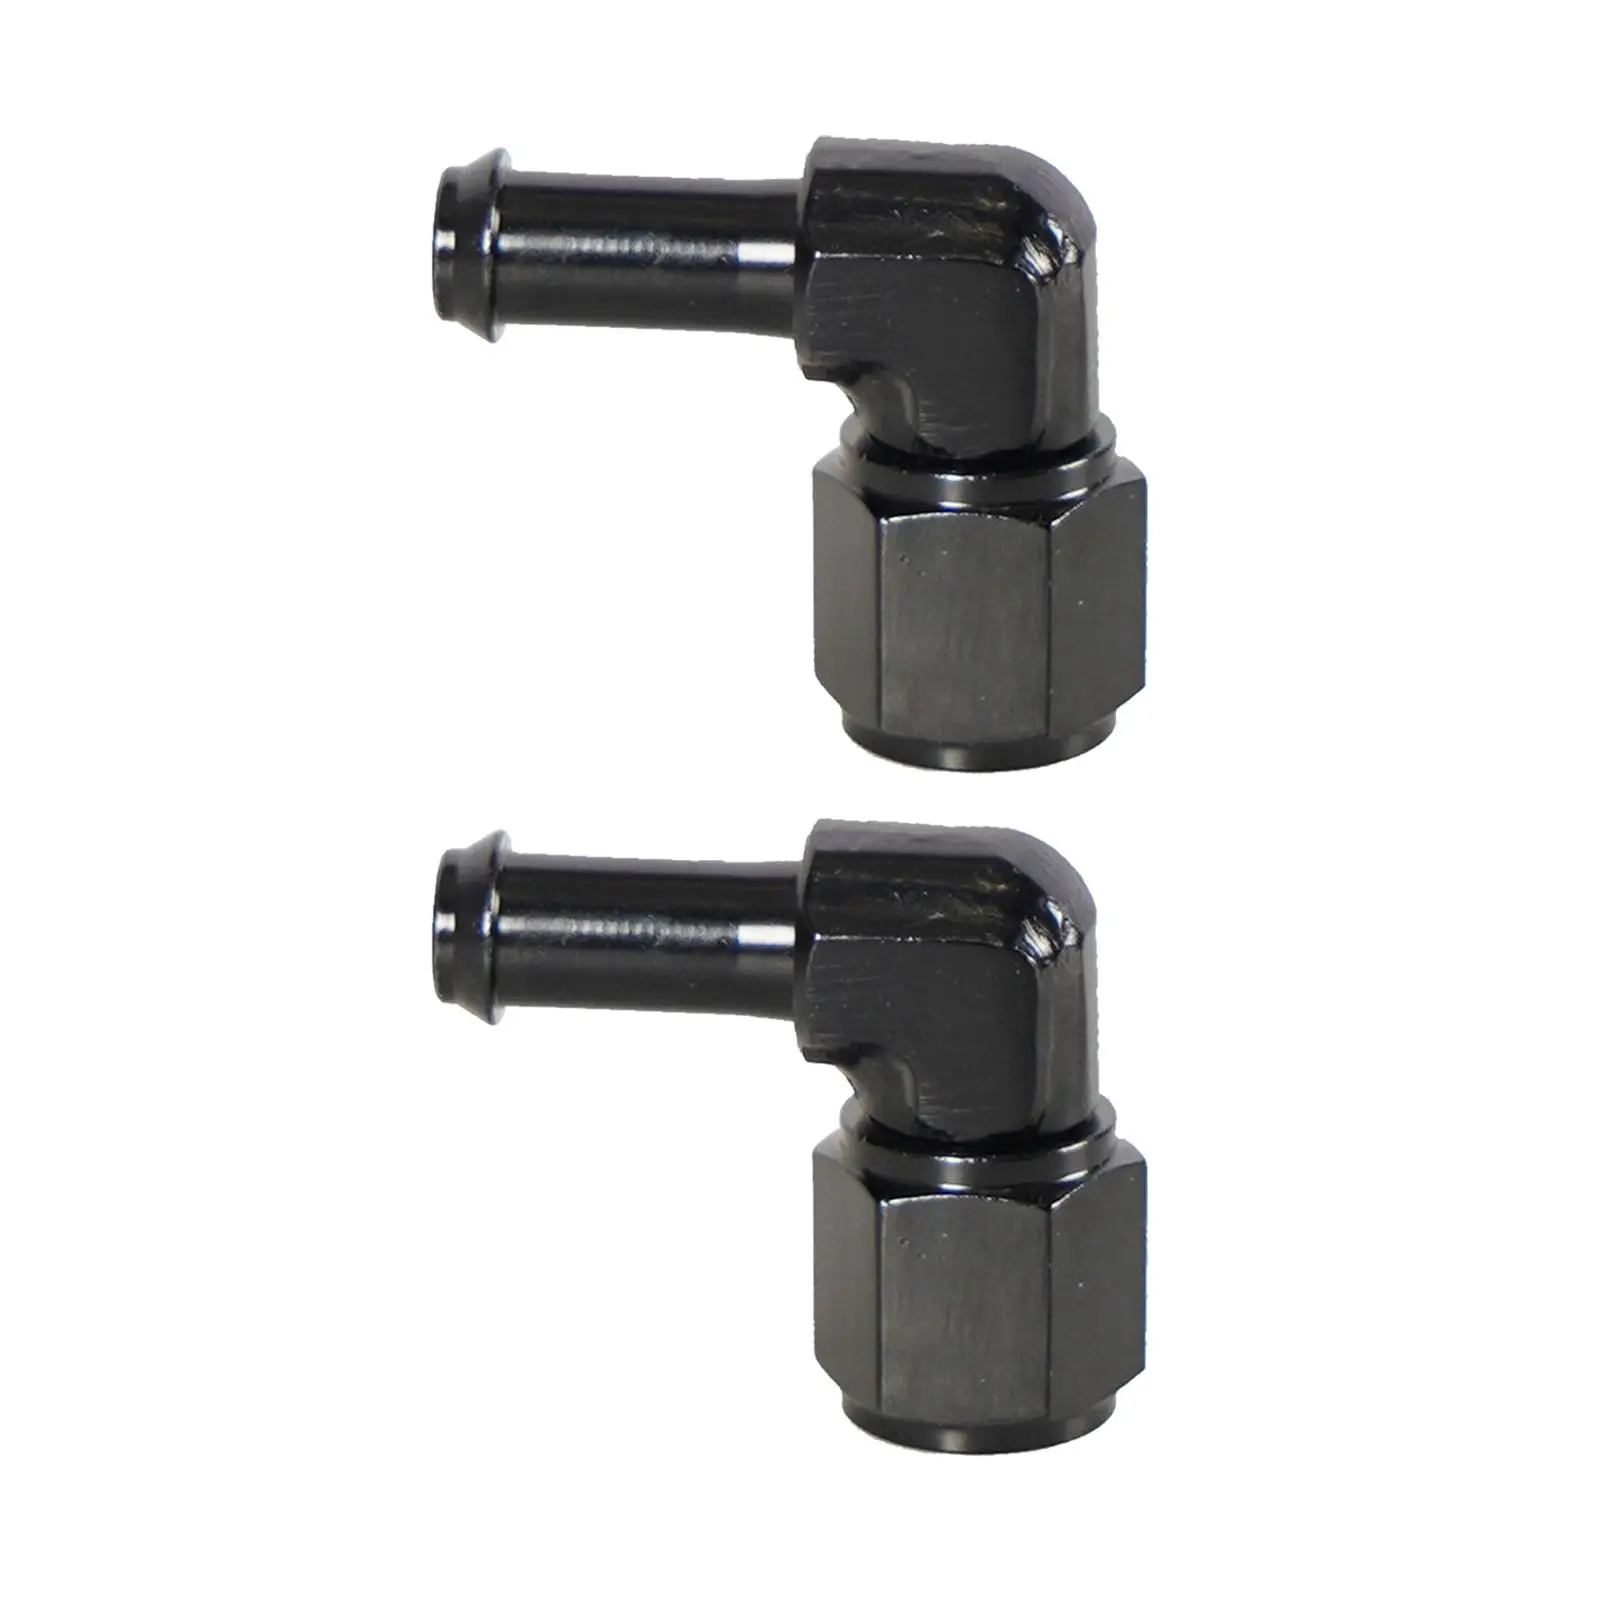 Female AN6 AN -6 Swivel Barb Fittings Adapter 90 Degree Quick Connect Aluminum Elbow Adapter Swivel Hose Fitting Black Anodized